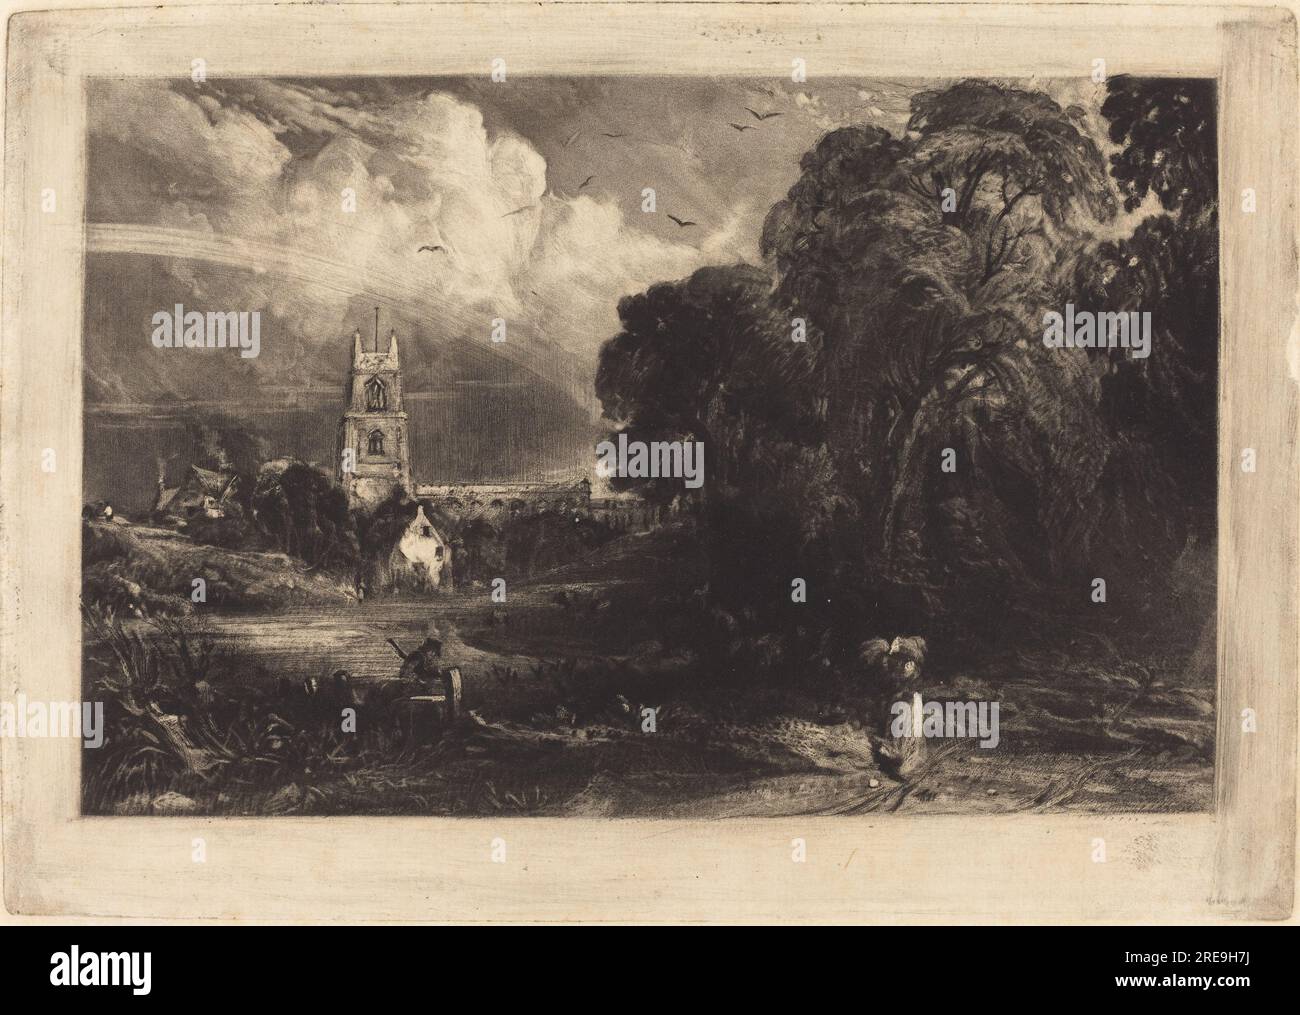 'David Lucas after John Constable, Stoke-by-Neyland, 1830, mezzotint on laid paper [proof], plate: 18.5 x 25.2 cm (7 5/16 x 9 15/16 in.) sheet: 19.3 x 30.6 cm (7 5/8 x 12 1/16 in.), Paul Mellon Fund, 2001.118.27' Stock Photo